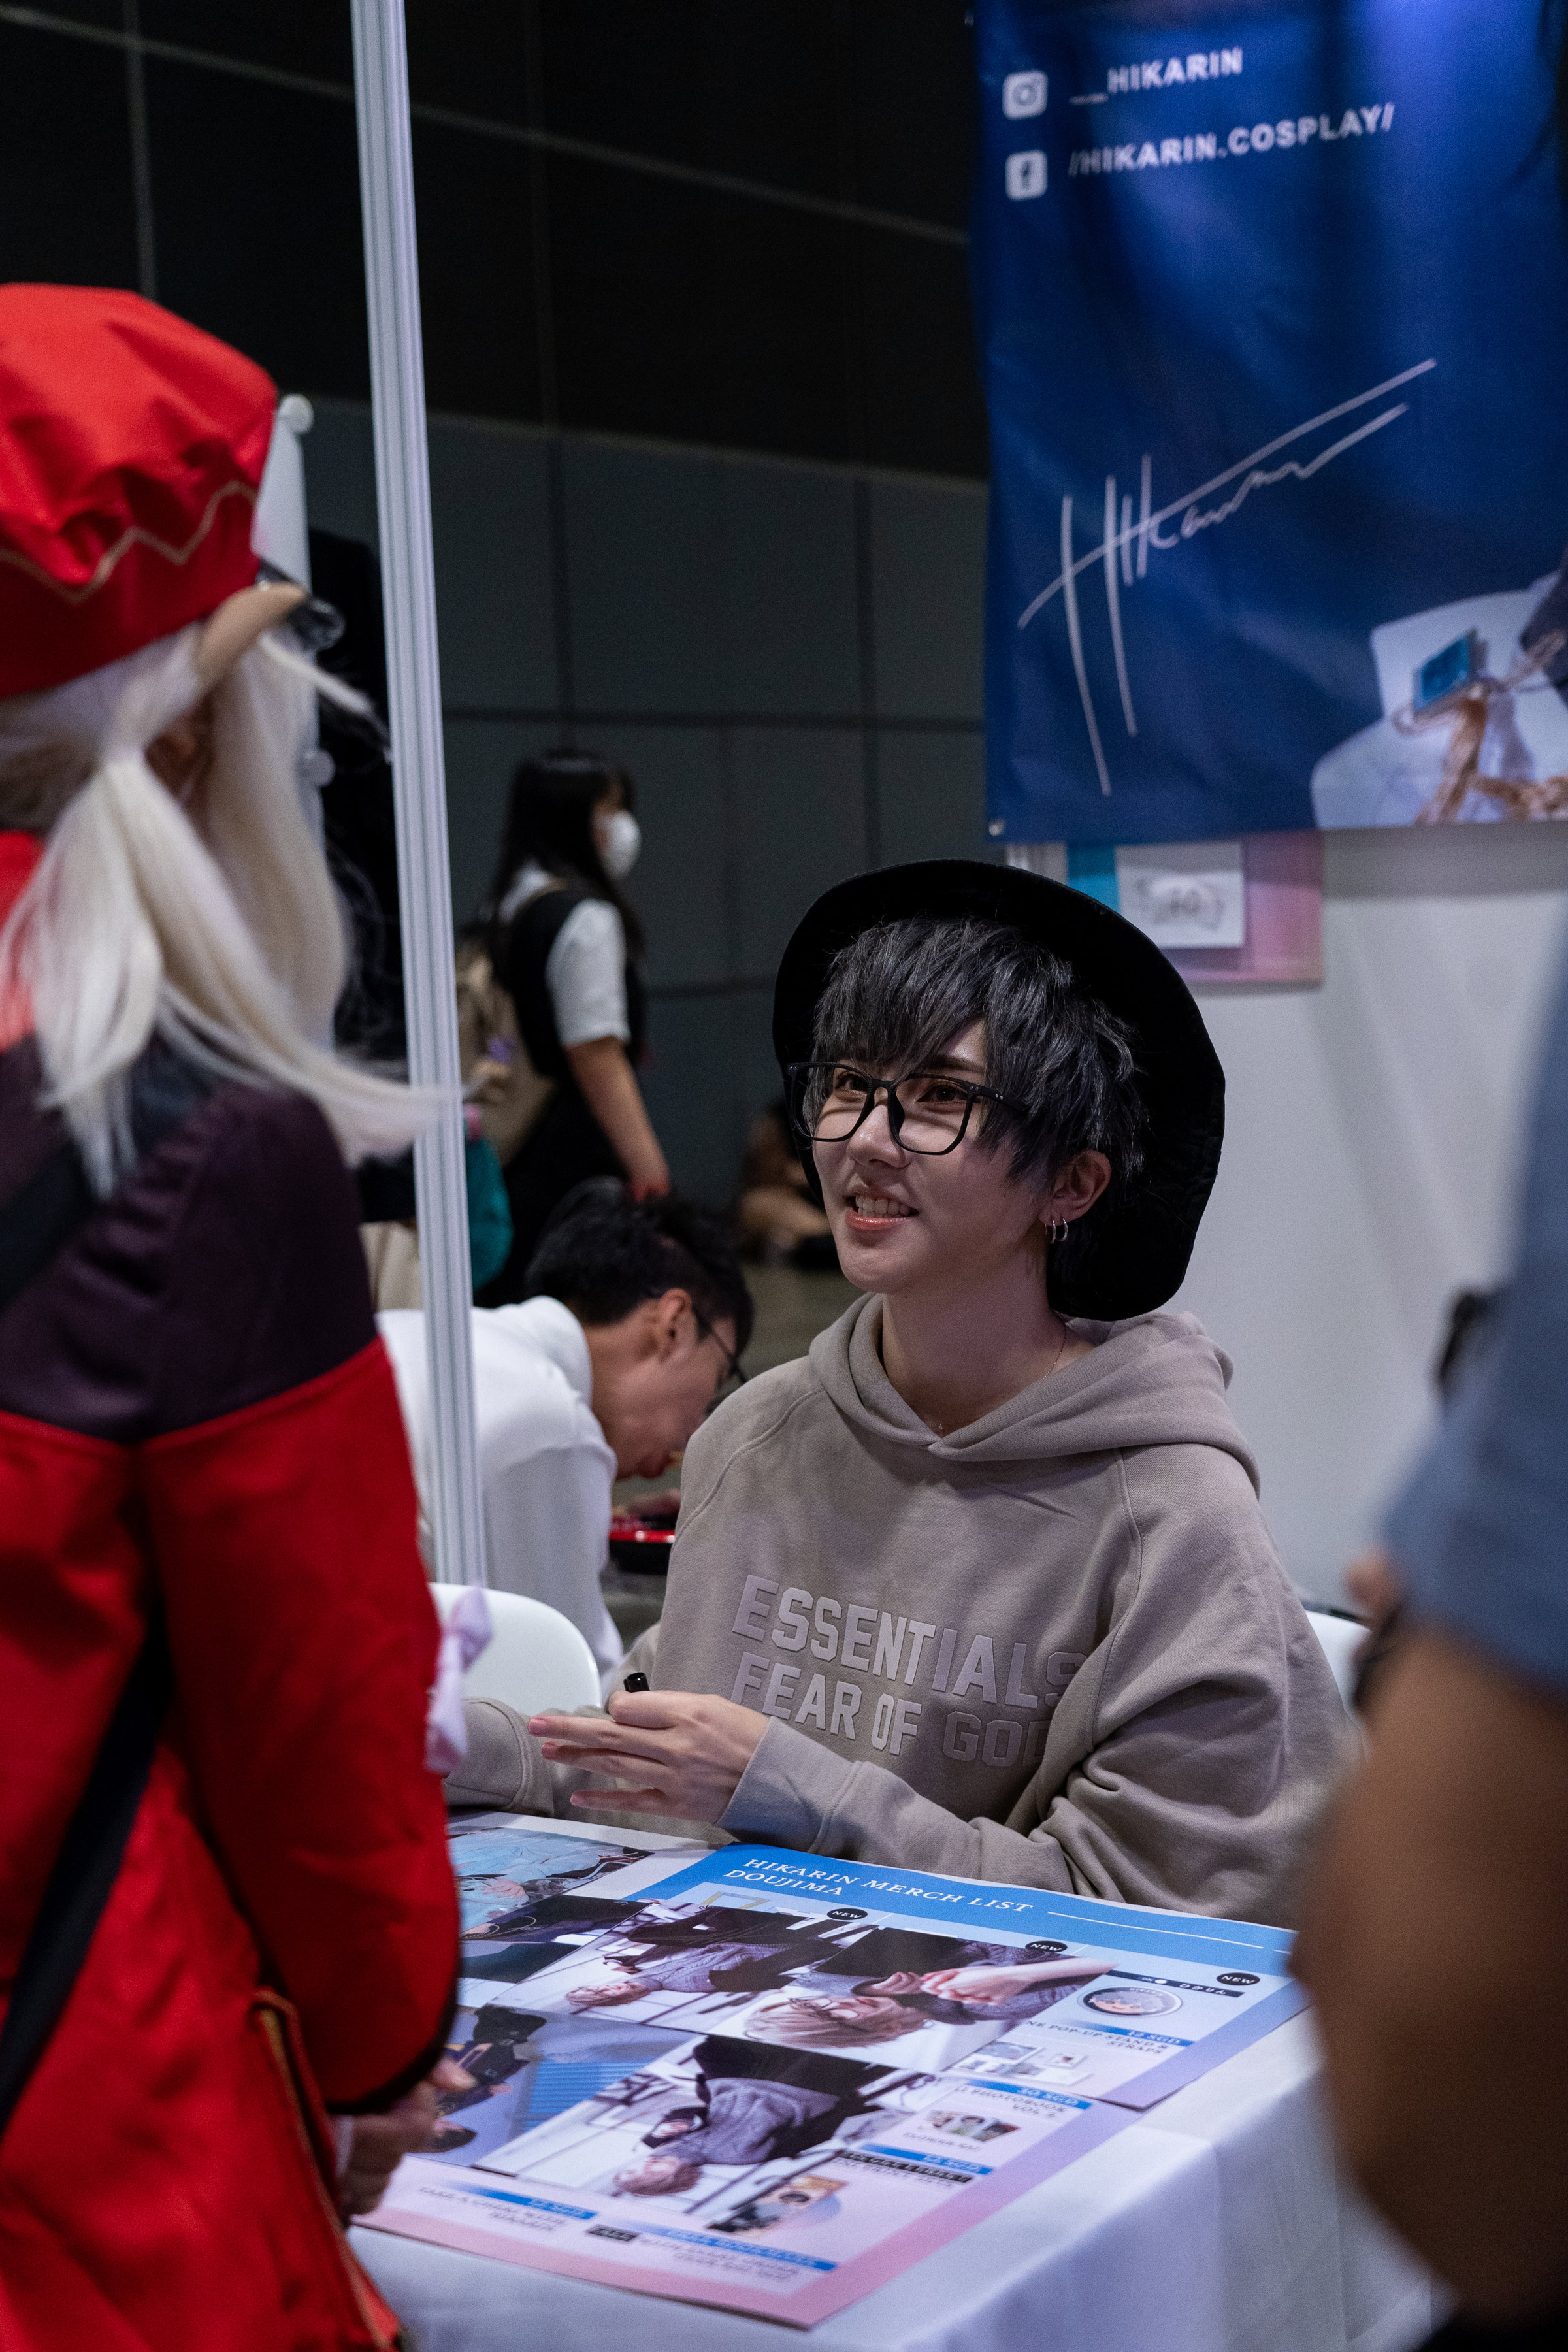 Famous cosplayer, Hikarin, chatting with a fan at her meet-and-greet booth.